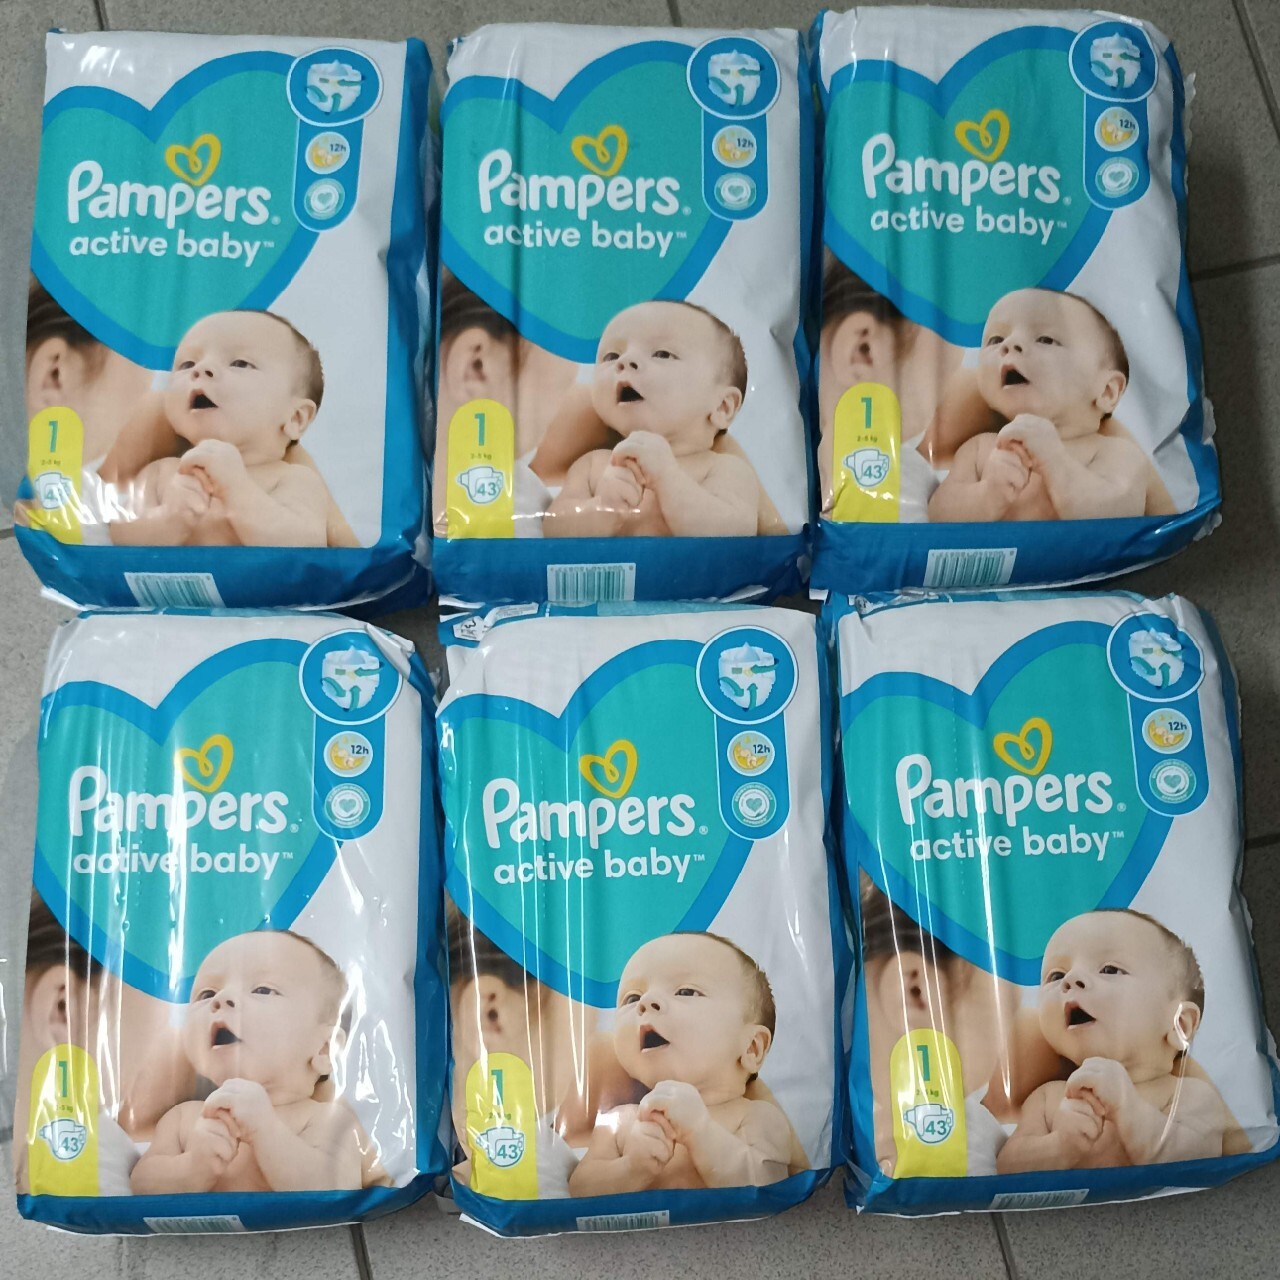 pampersy pampers 1 allegro